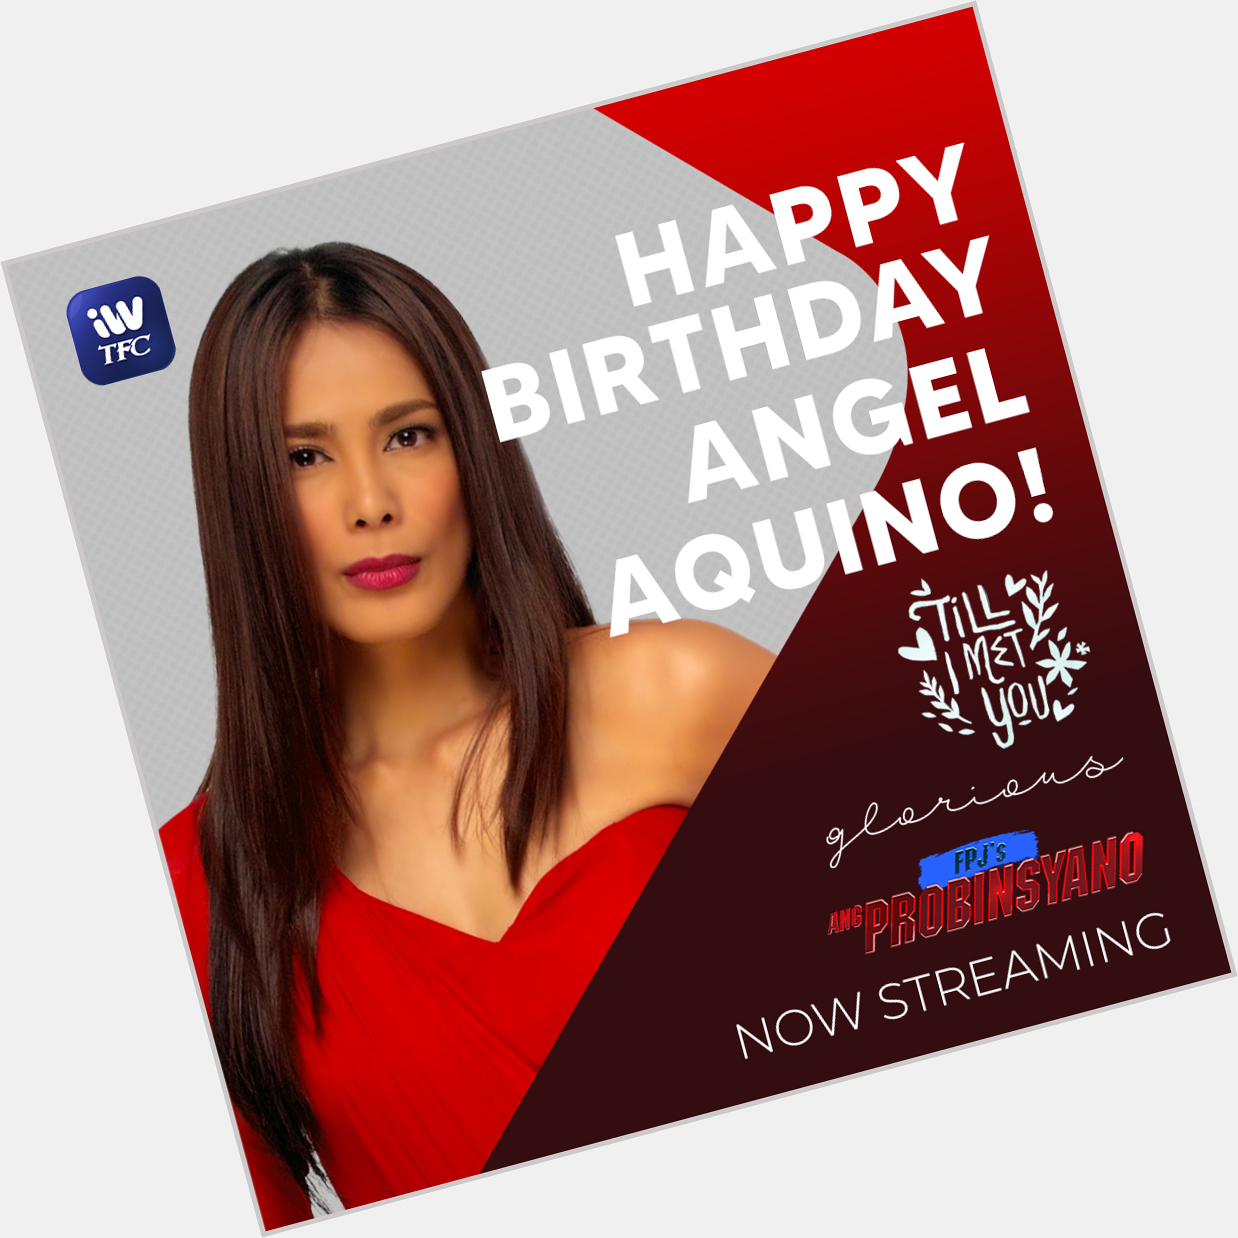 Happy birthday, Ms. Angel Aquino!   Catch her in Glorious, FPJ\s Ang Probinsyano, and Till I Met You on iWantTFC! 